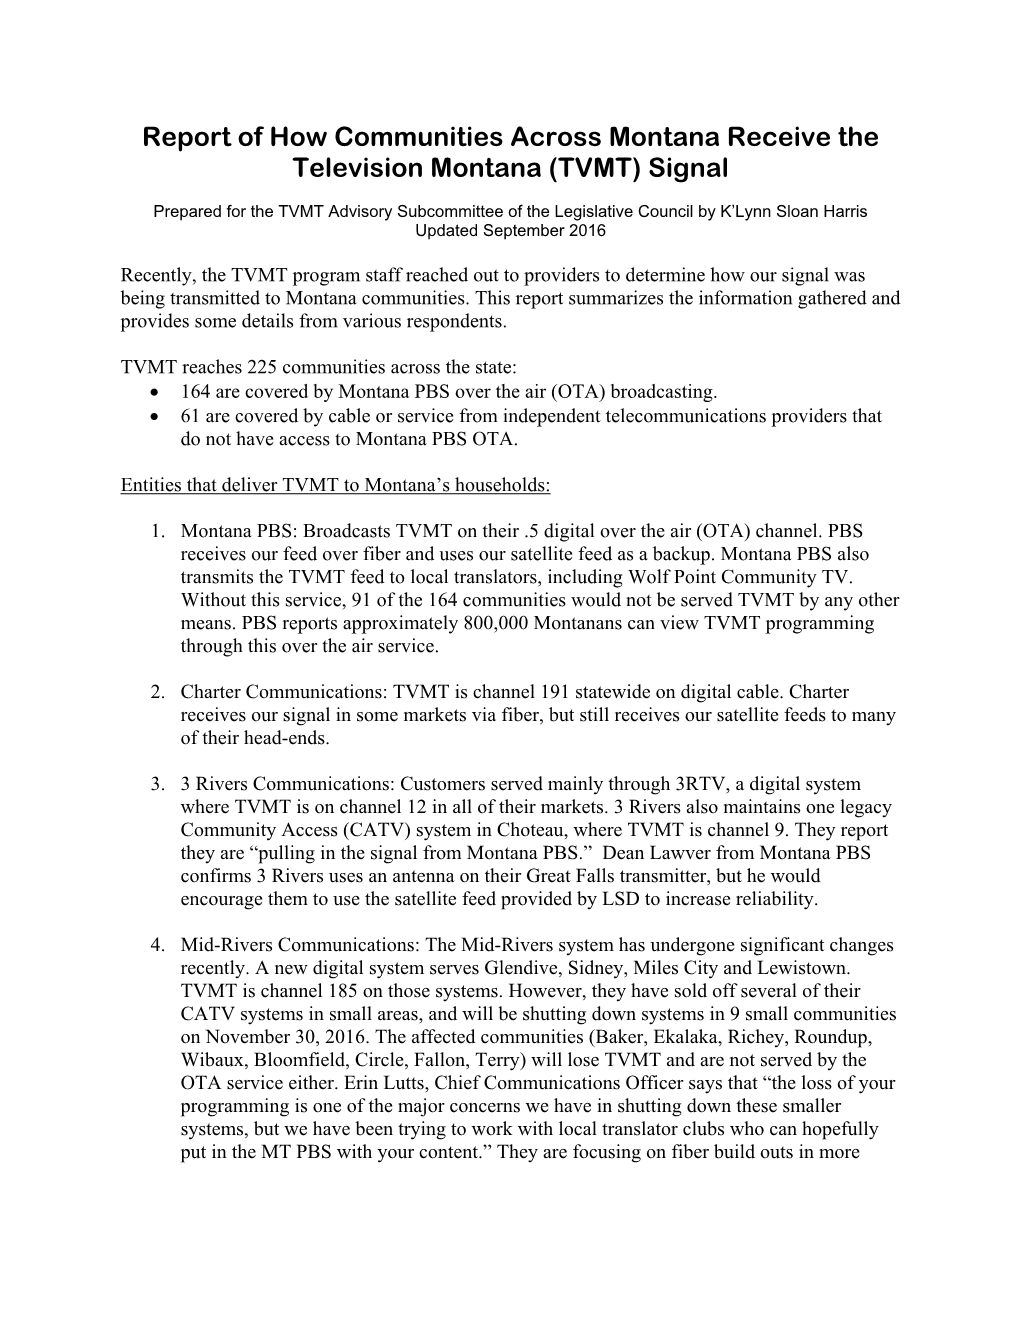 Report of How Communities Across Montana Receive the Television Montana (TVMT) Signal